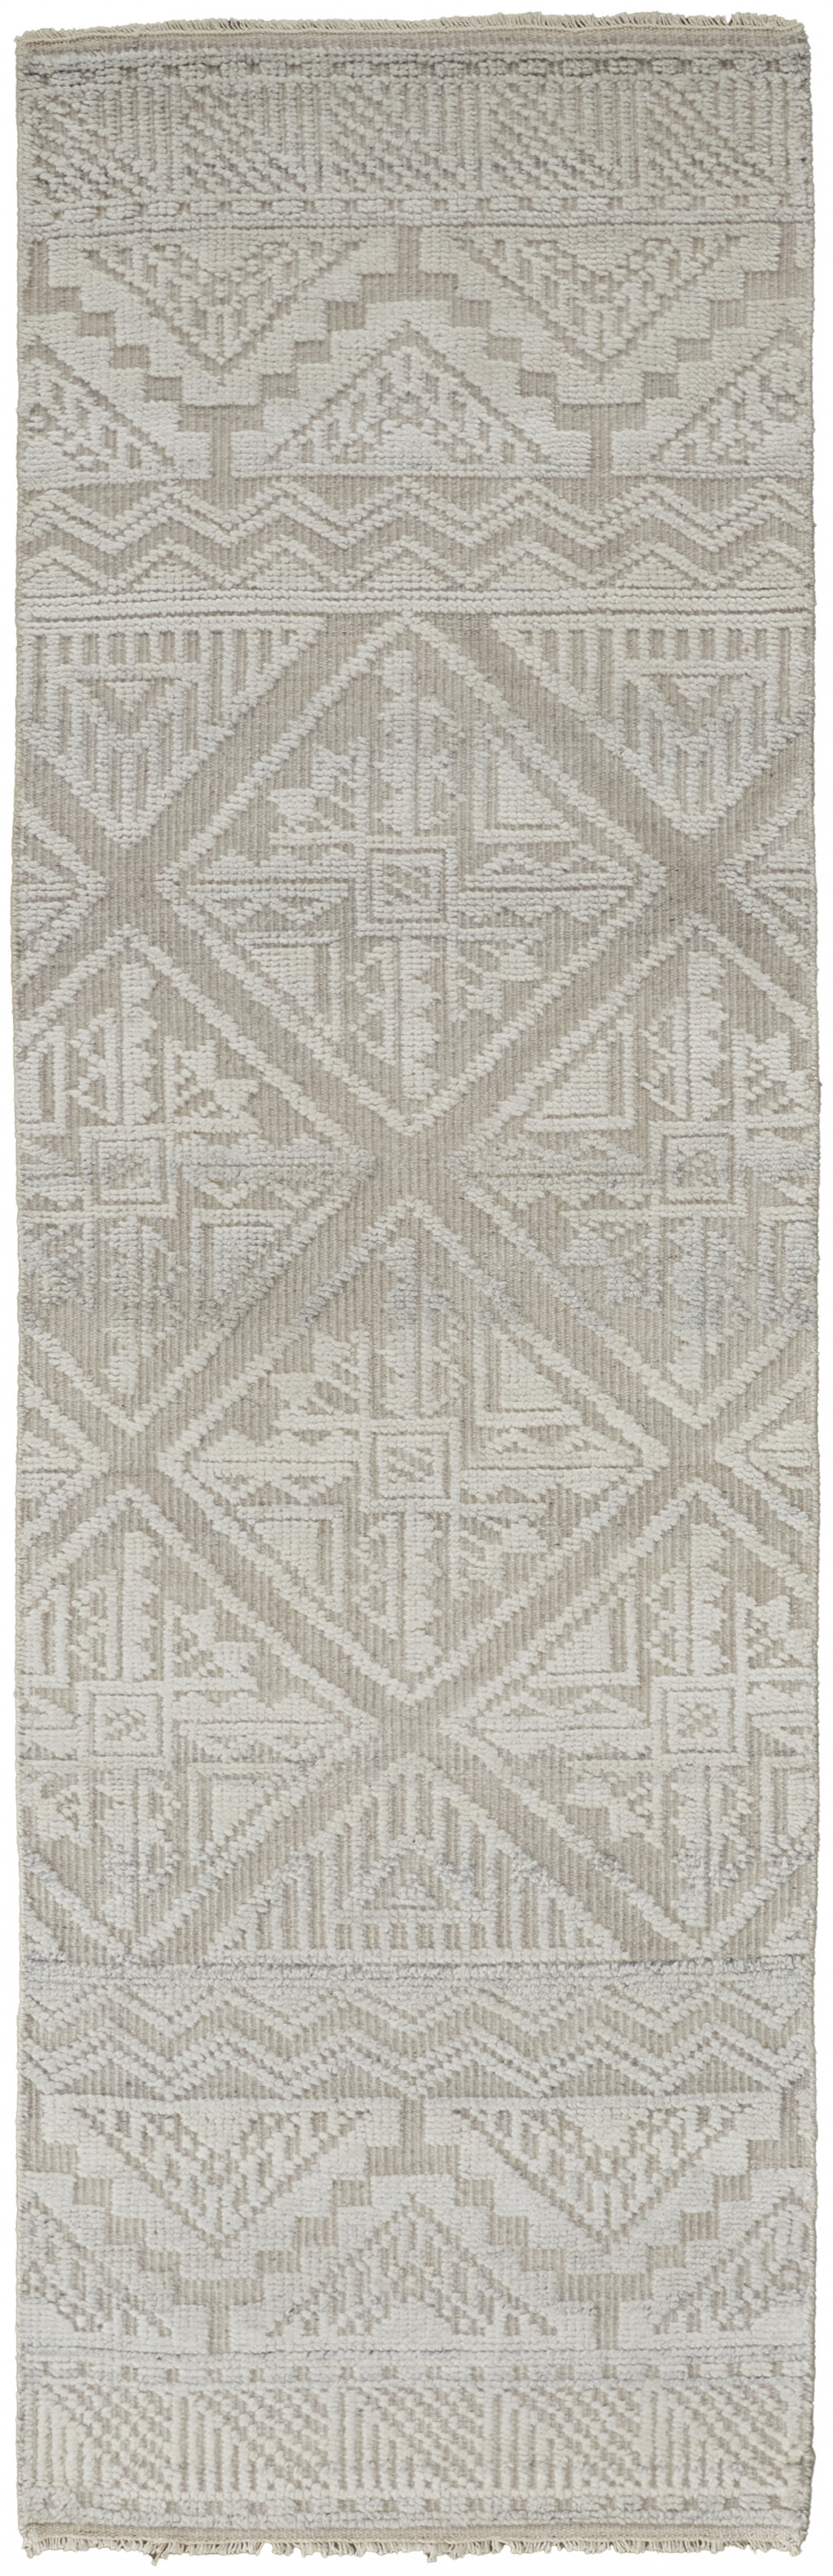 8' Ivory Tan And Gray Geometric Hand Knotted Runner Rug-512586-1